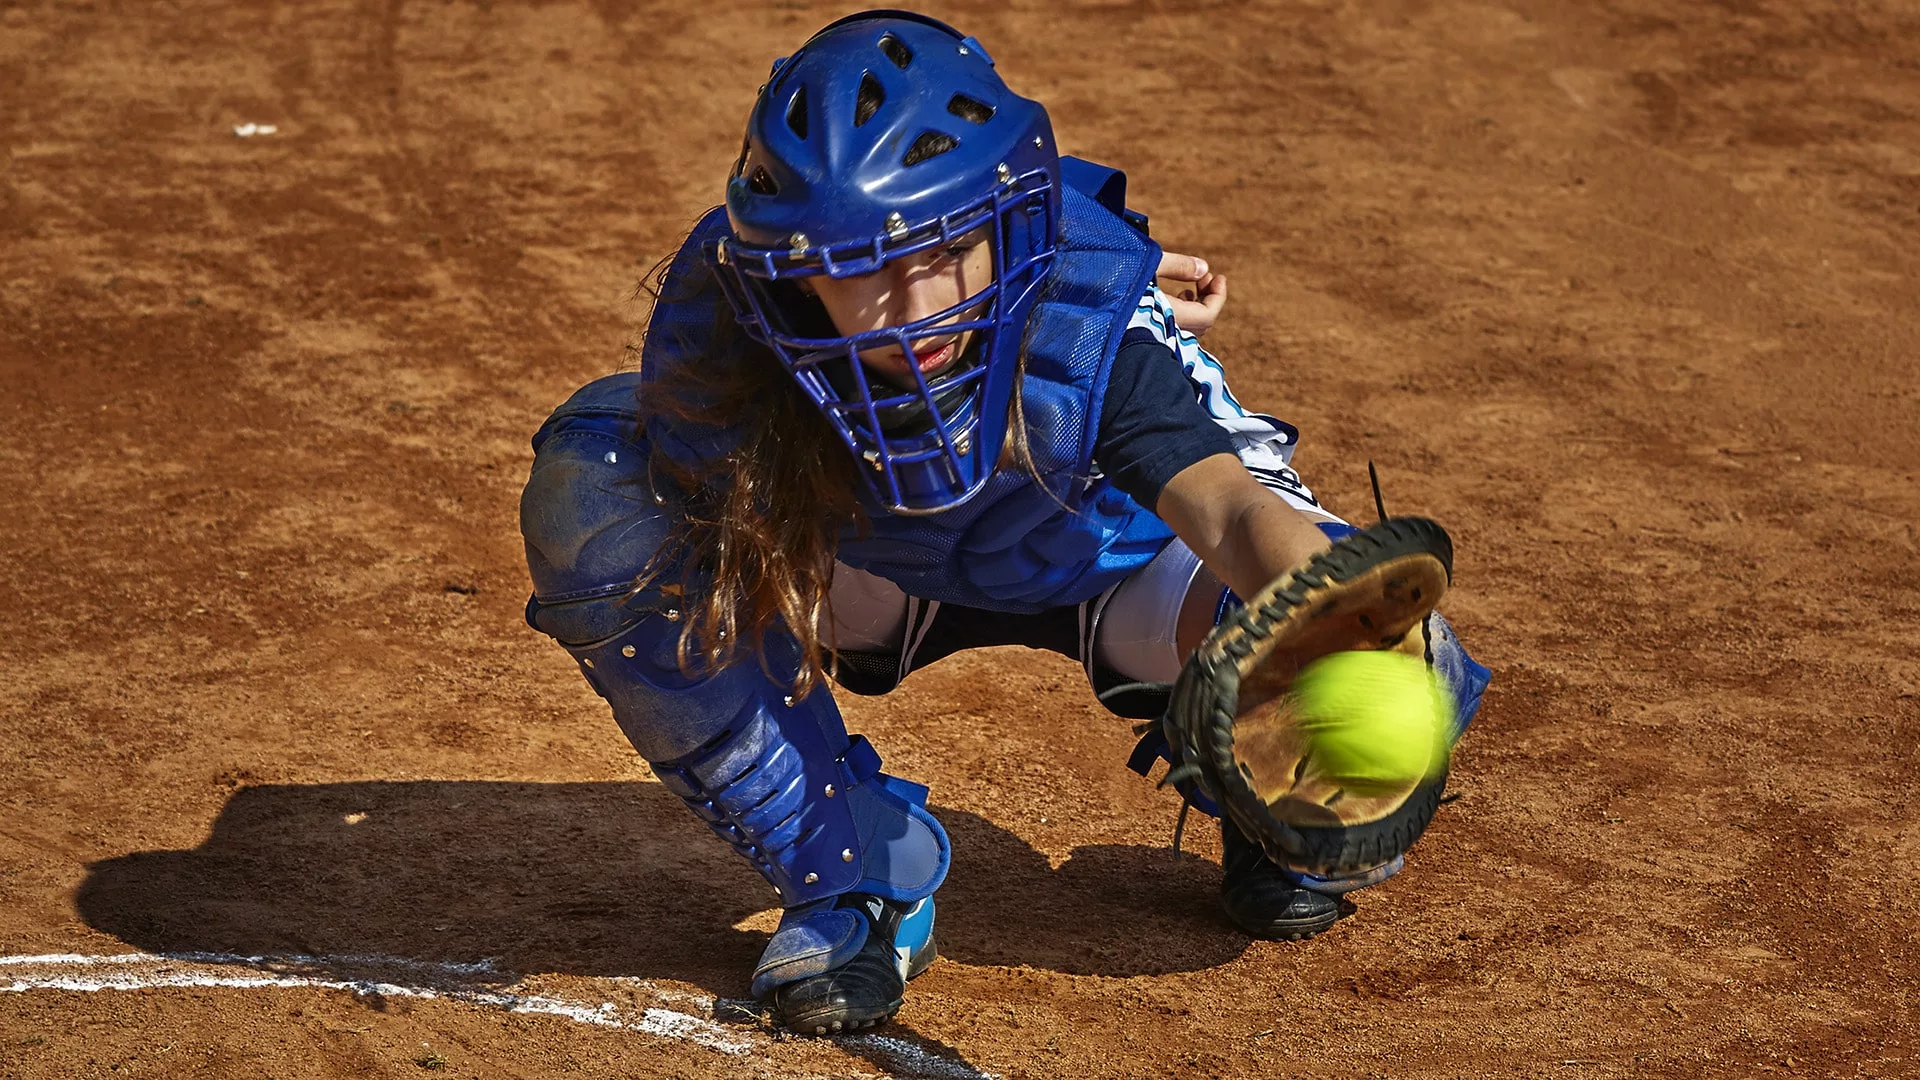 Teen female catcher in all blue catching a softball surrounded by dirt.